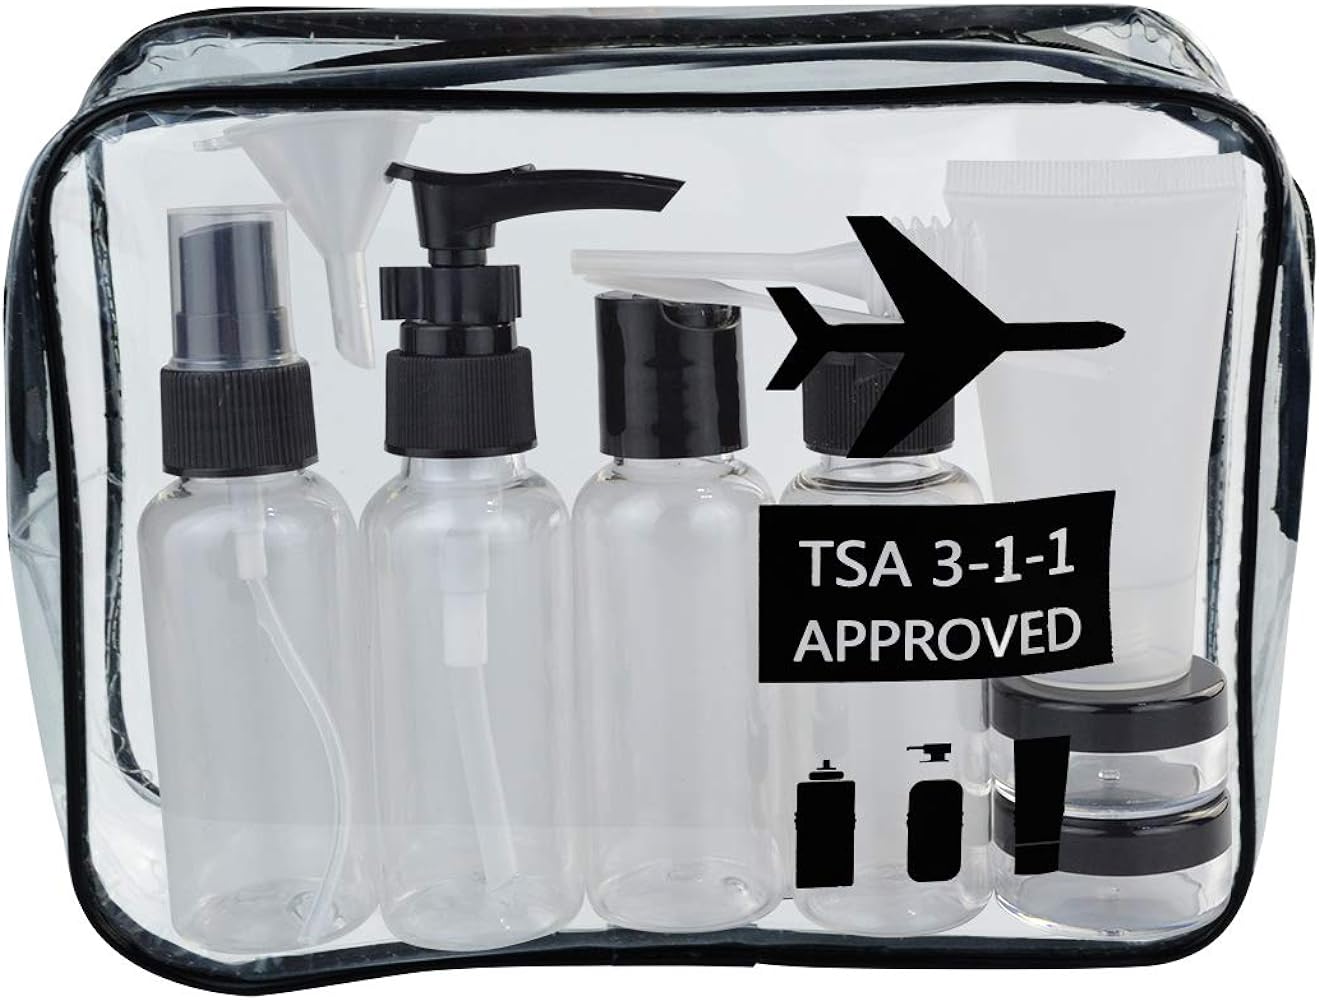 What Items are Allowed in My TSA Approved Quart Size Bag? 2023